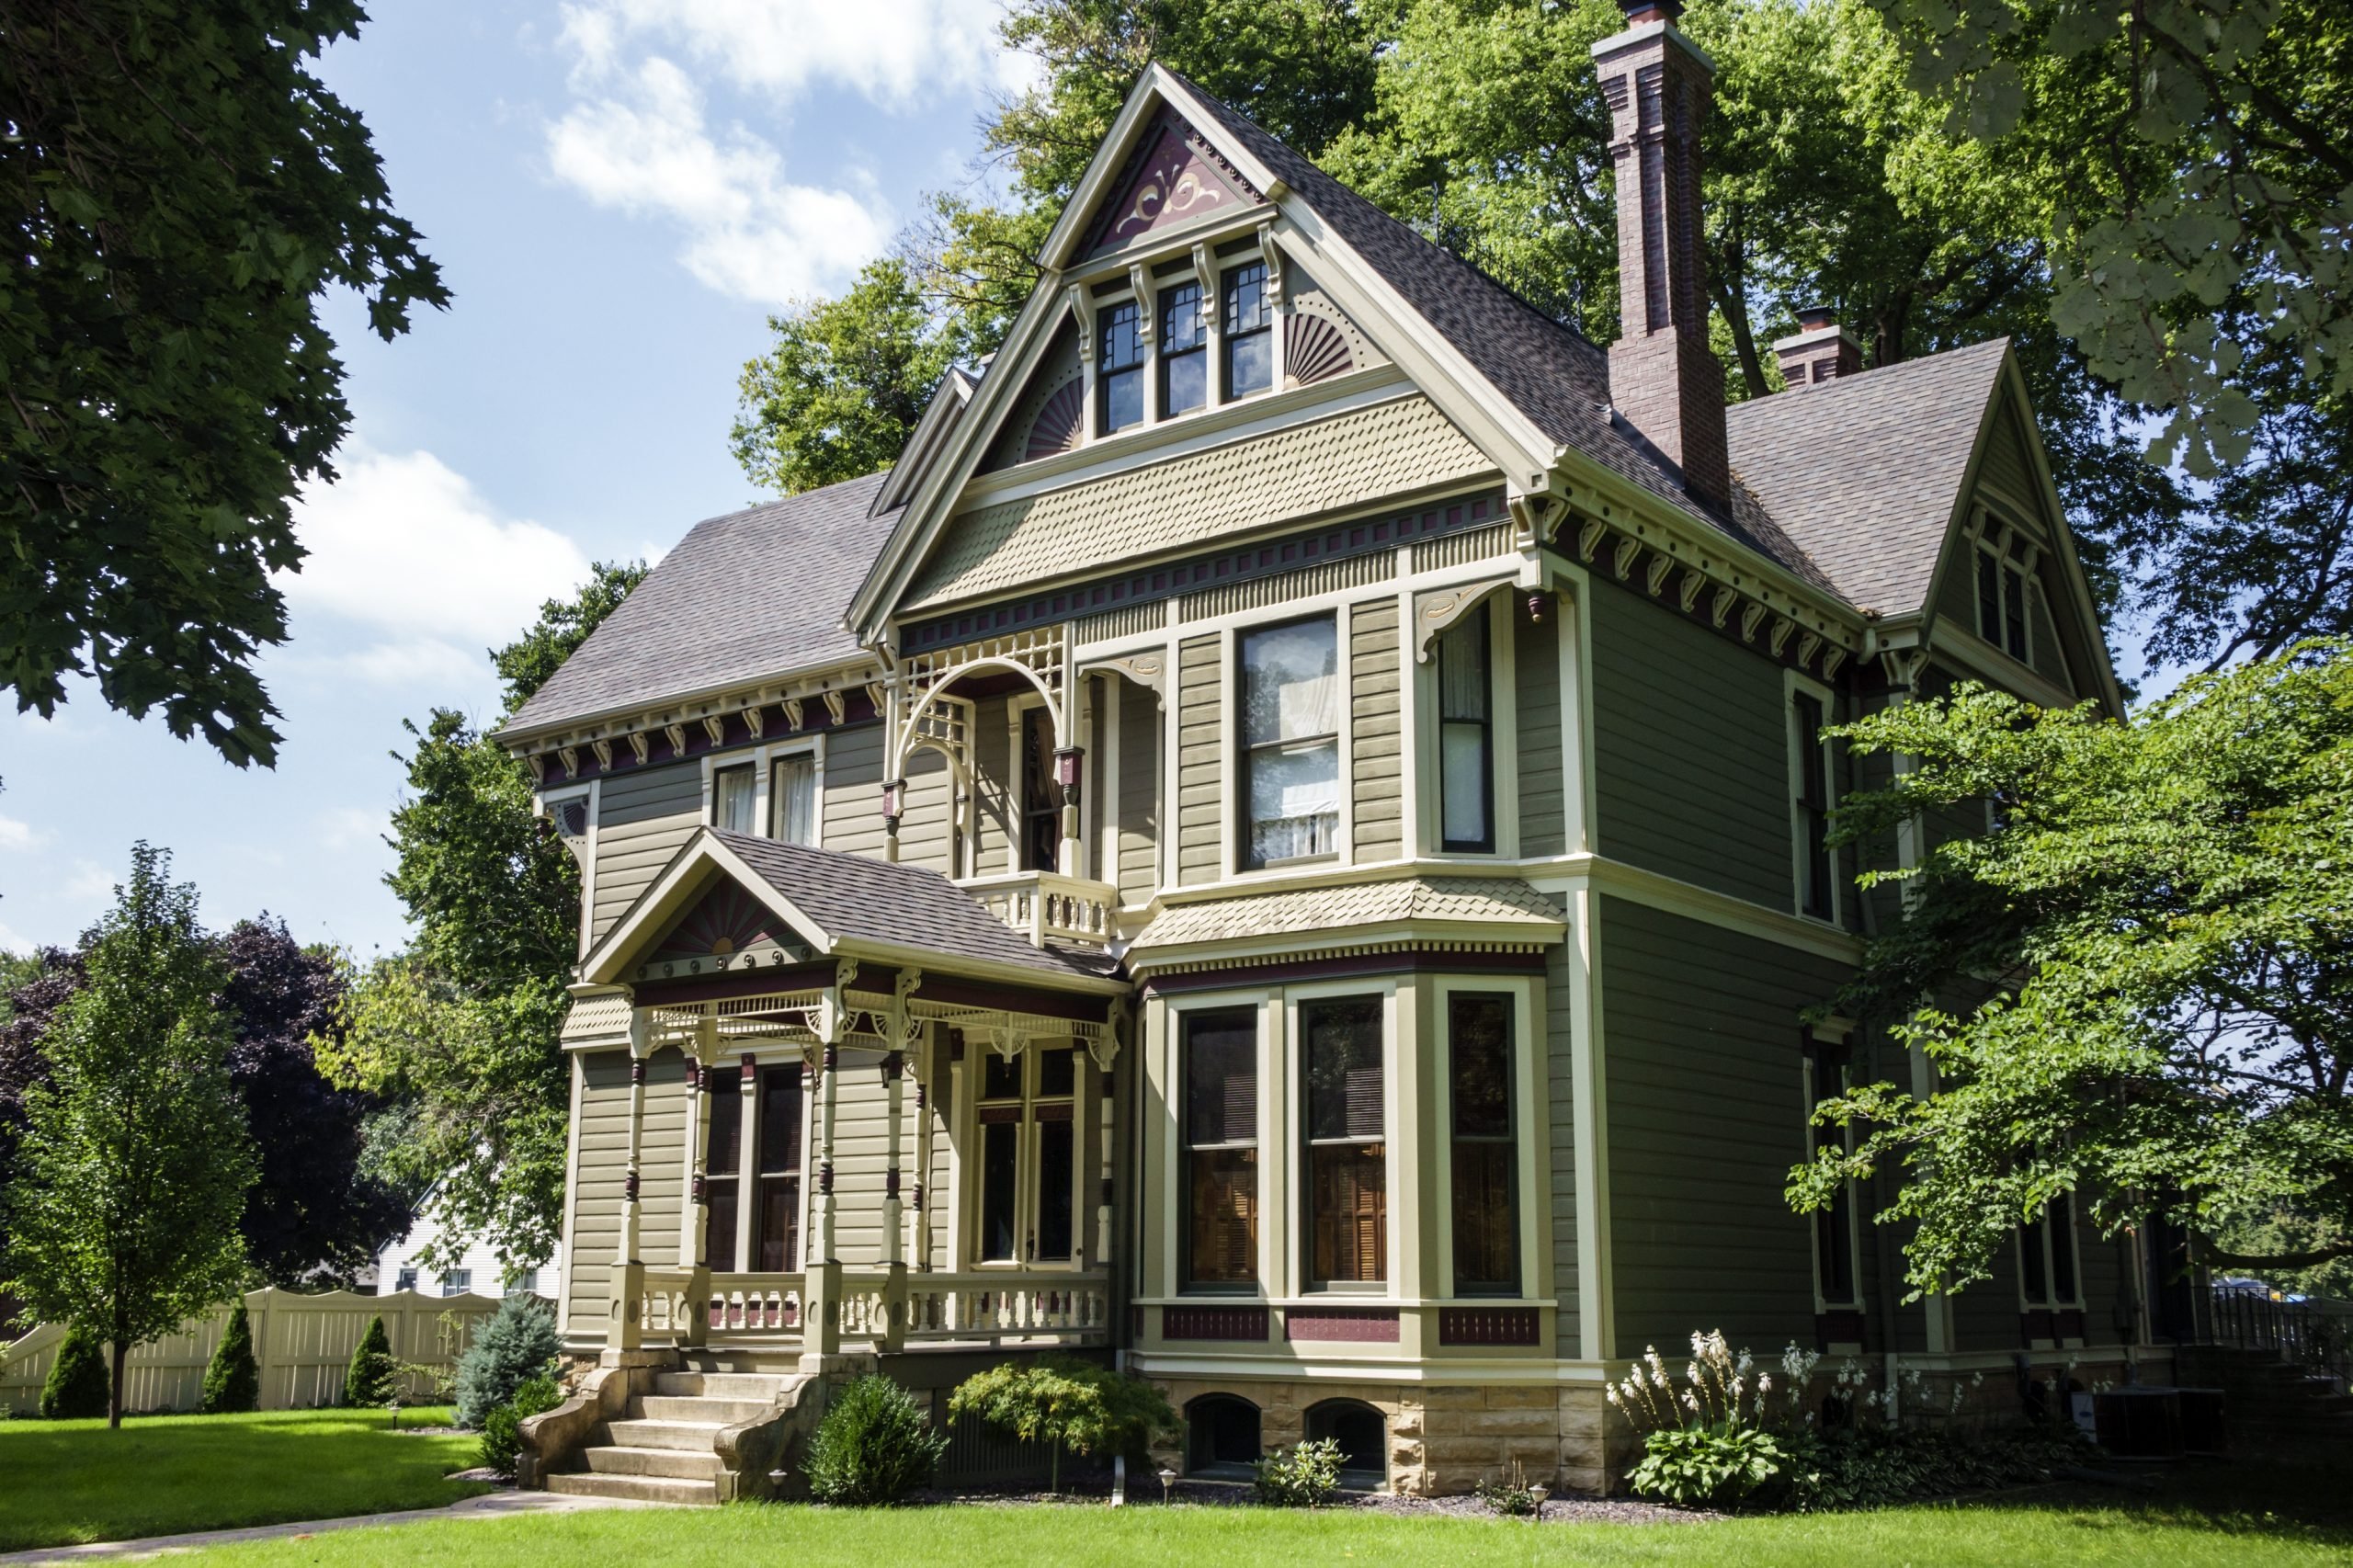 How Much Does It Cost To Restore an Historic Home?